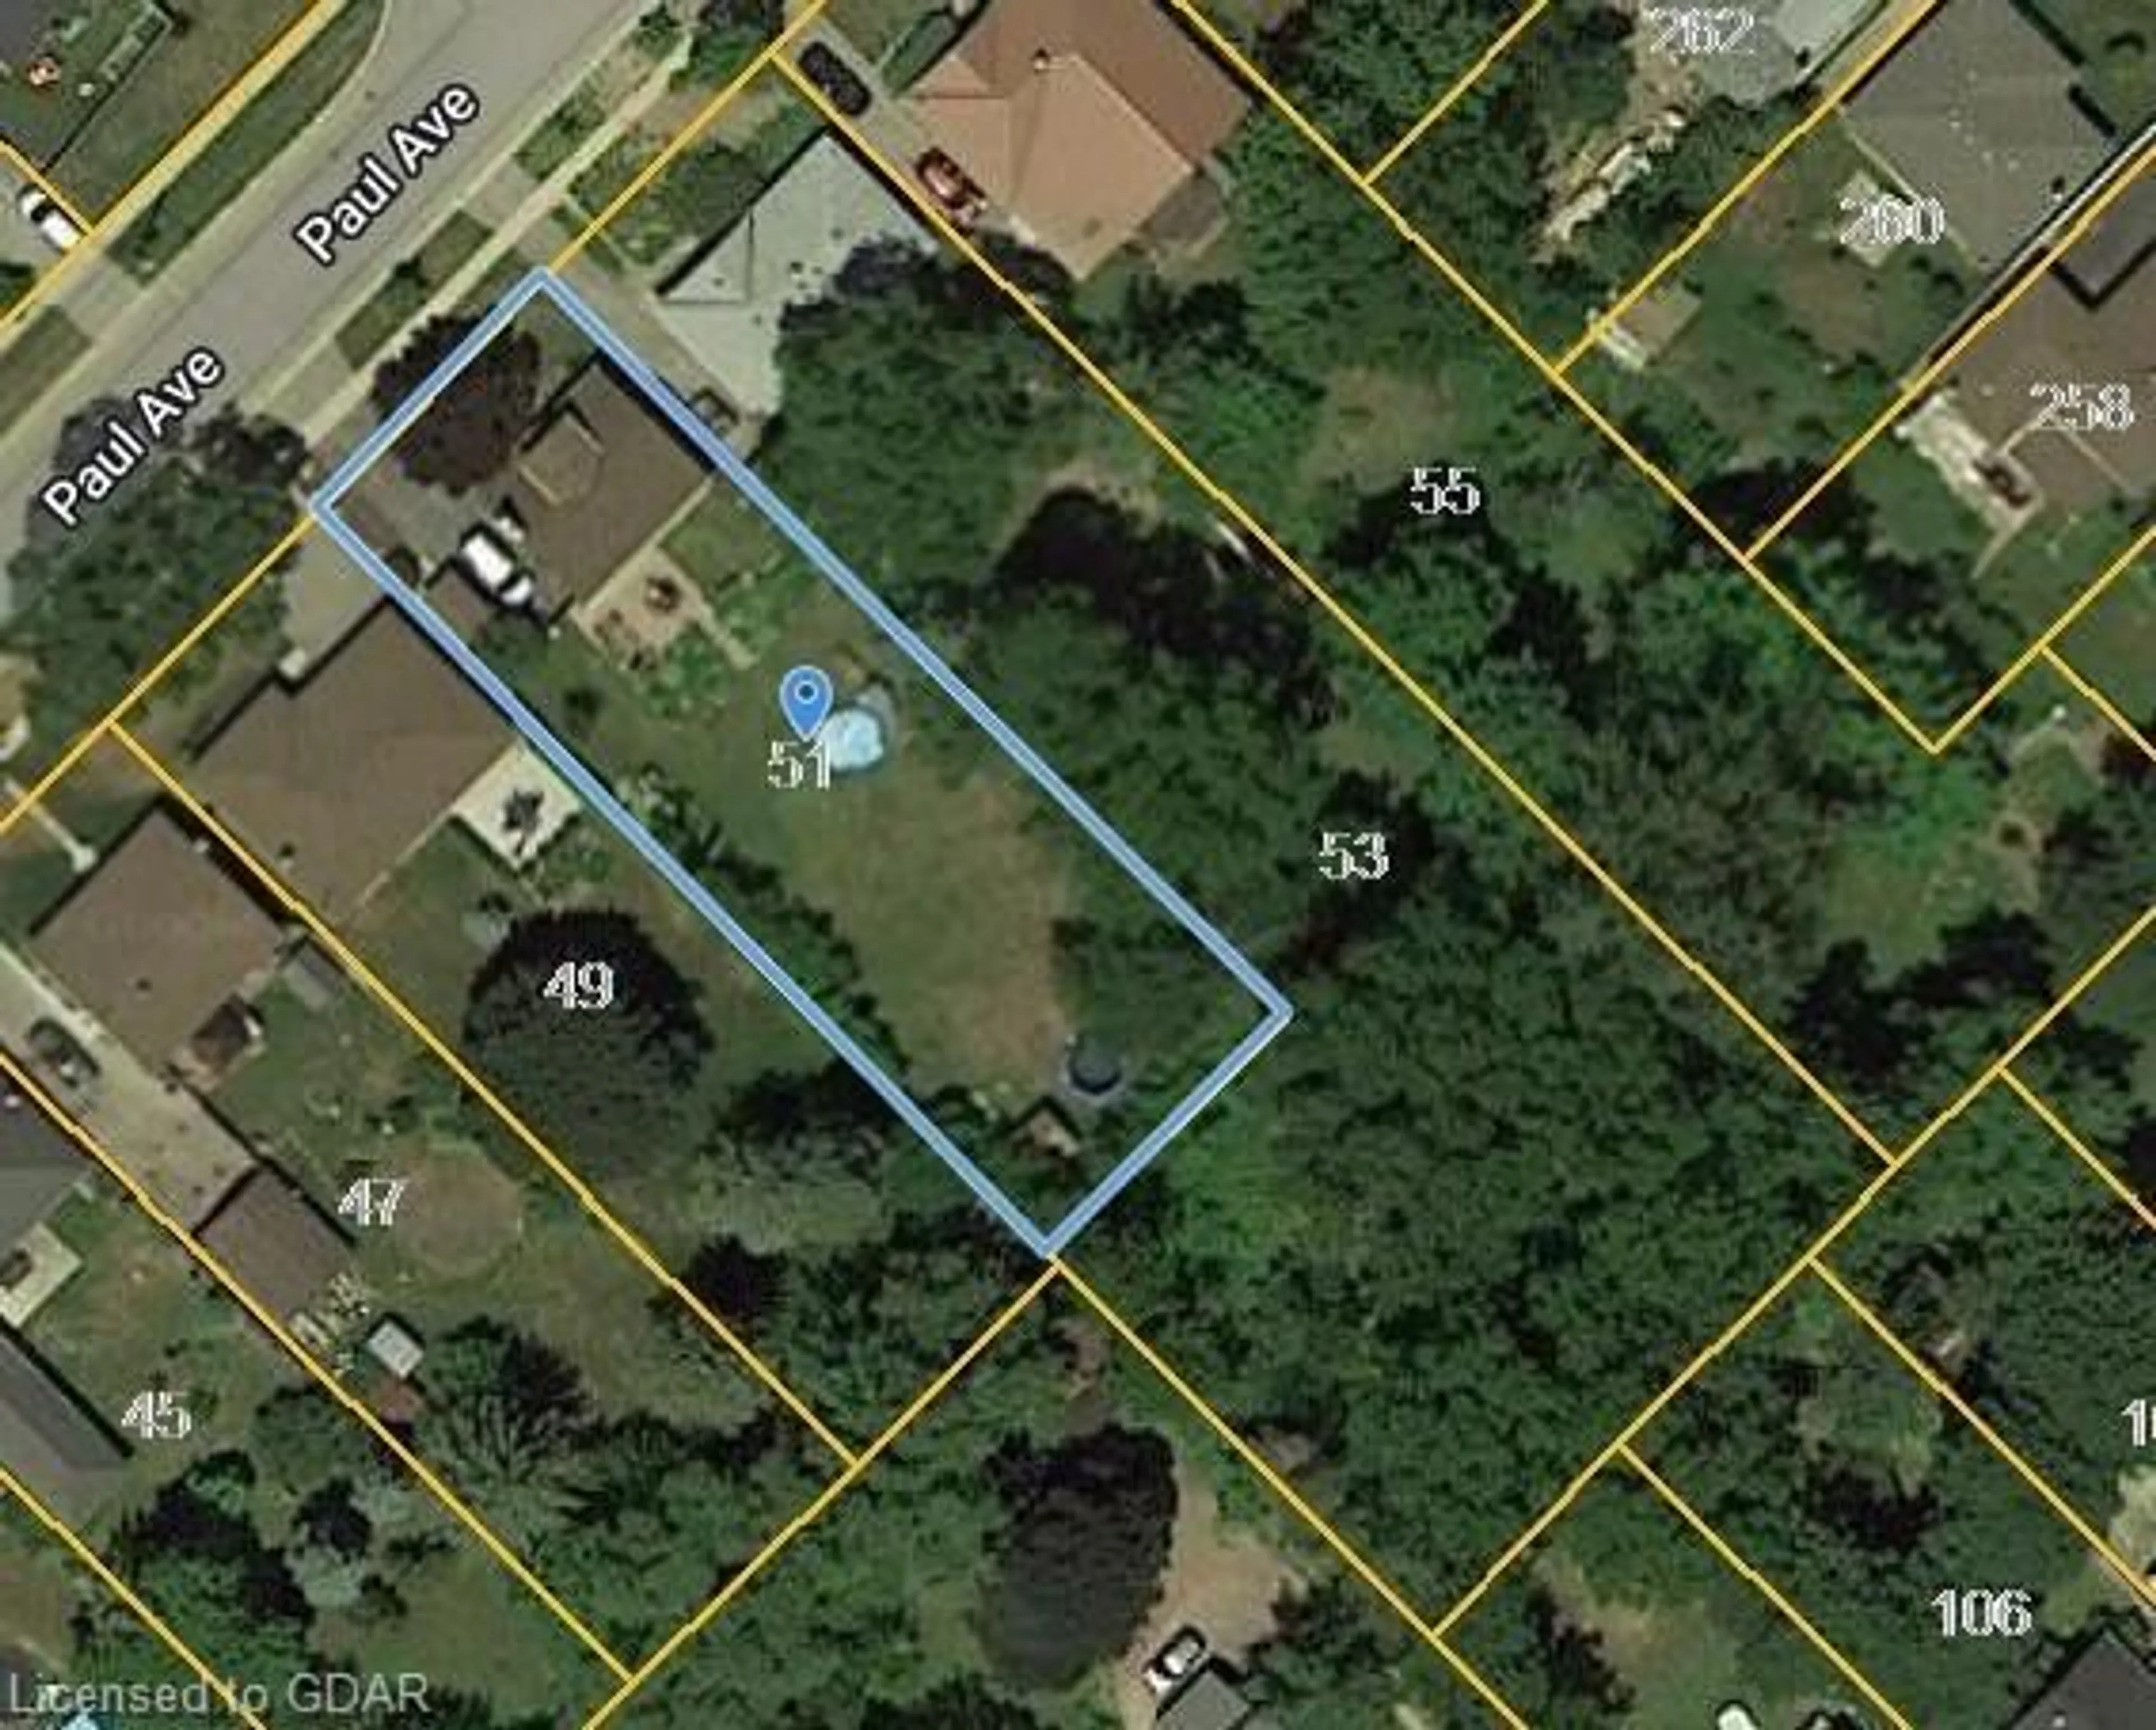 Picture of a map for 51 Paul Ave, Guelph Ontario N1E 1S3